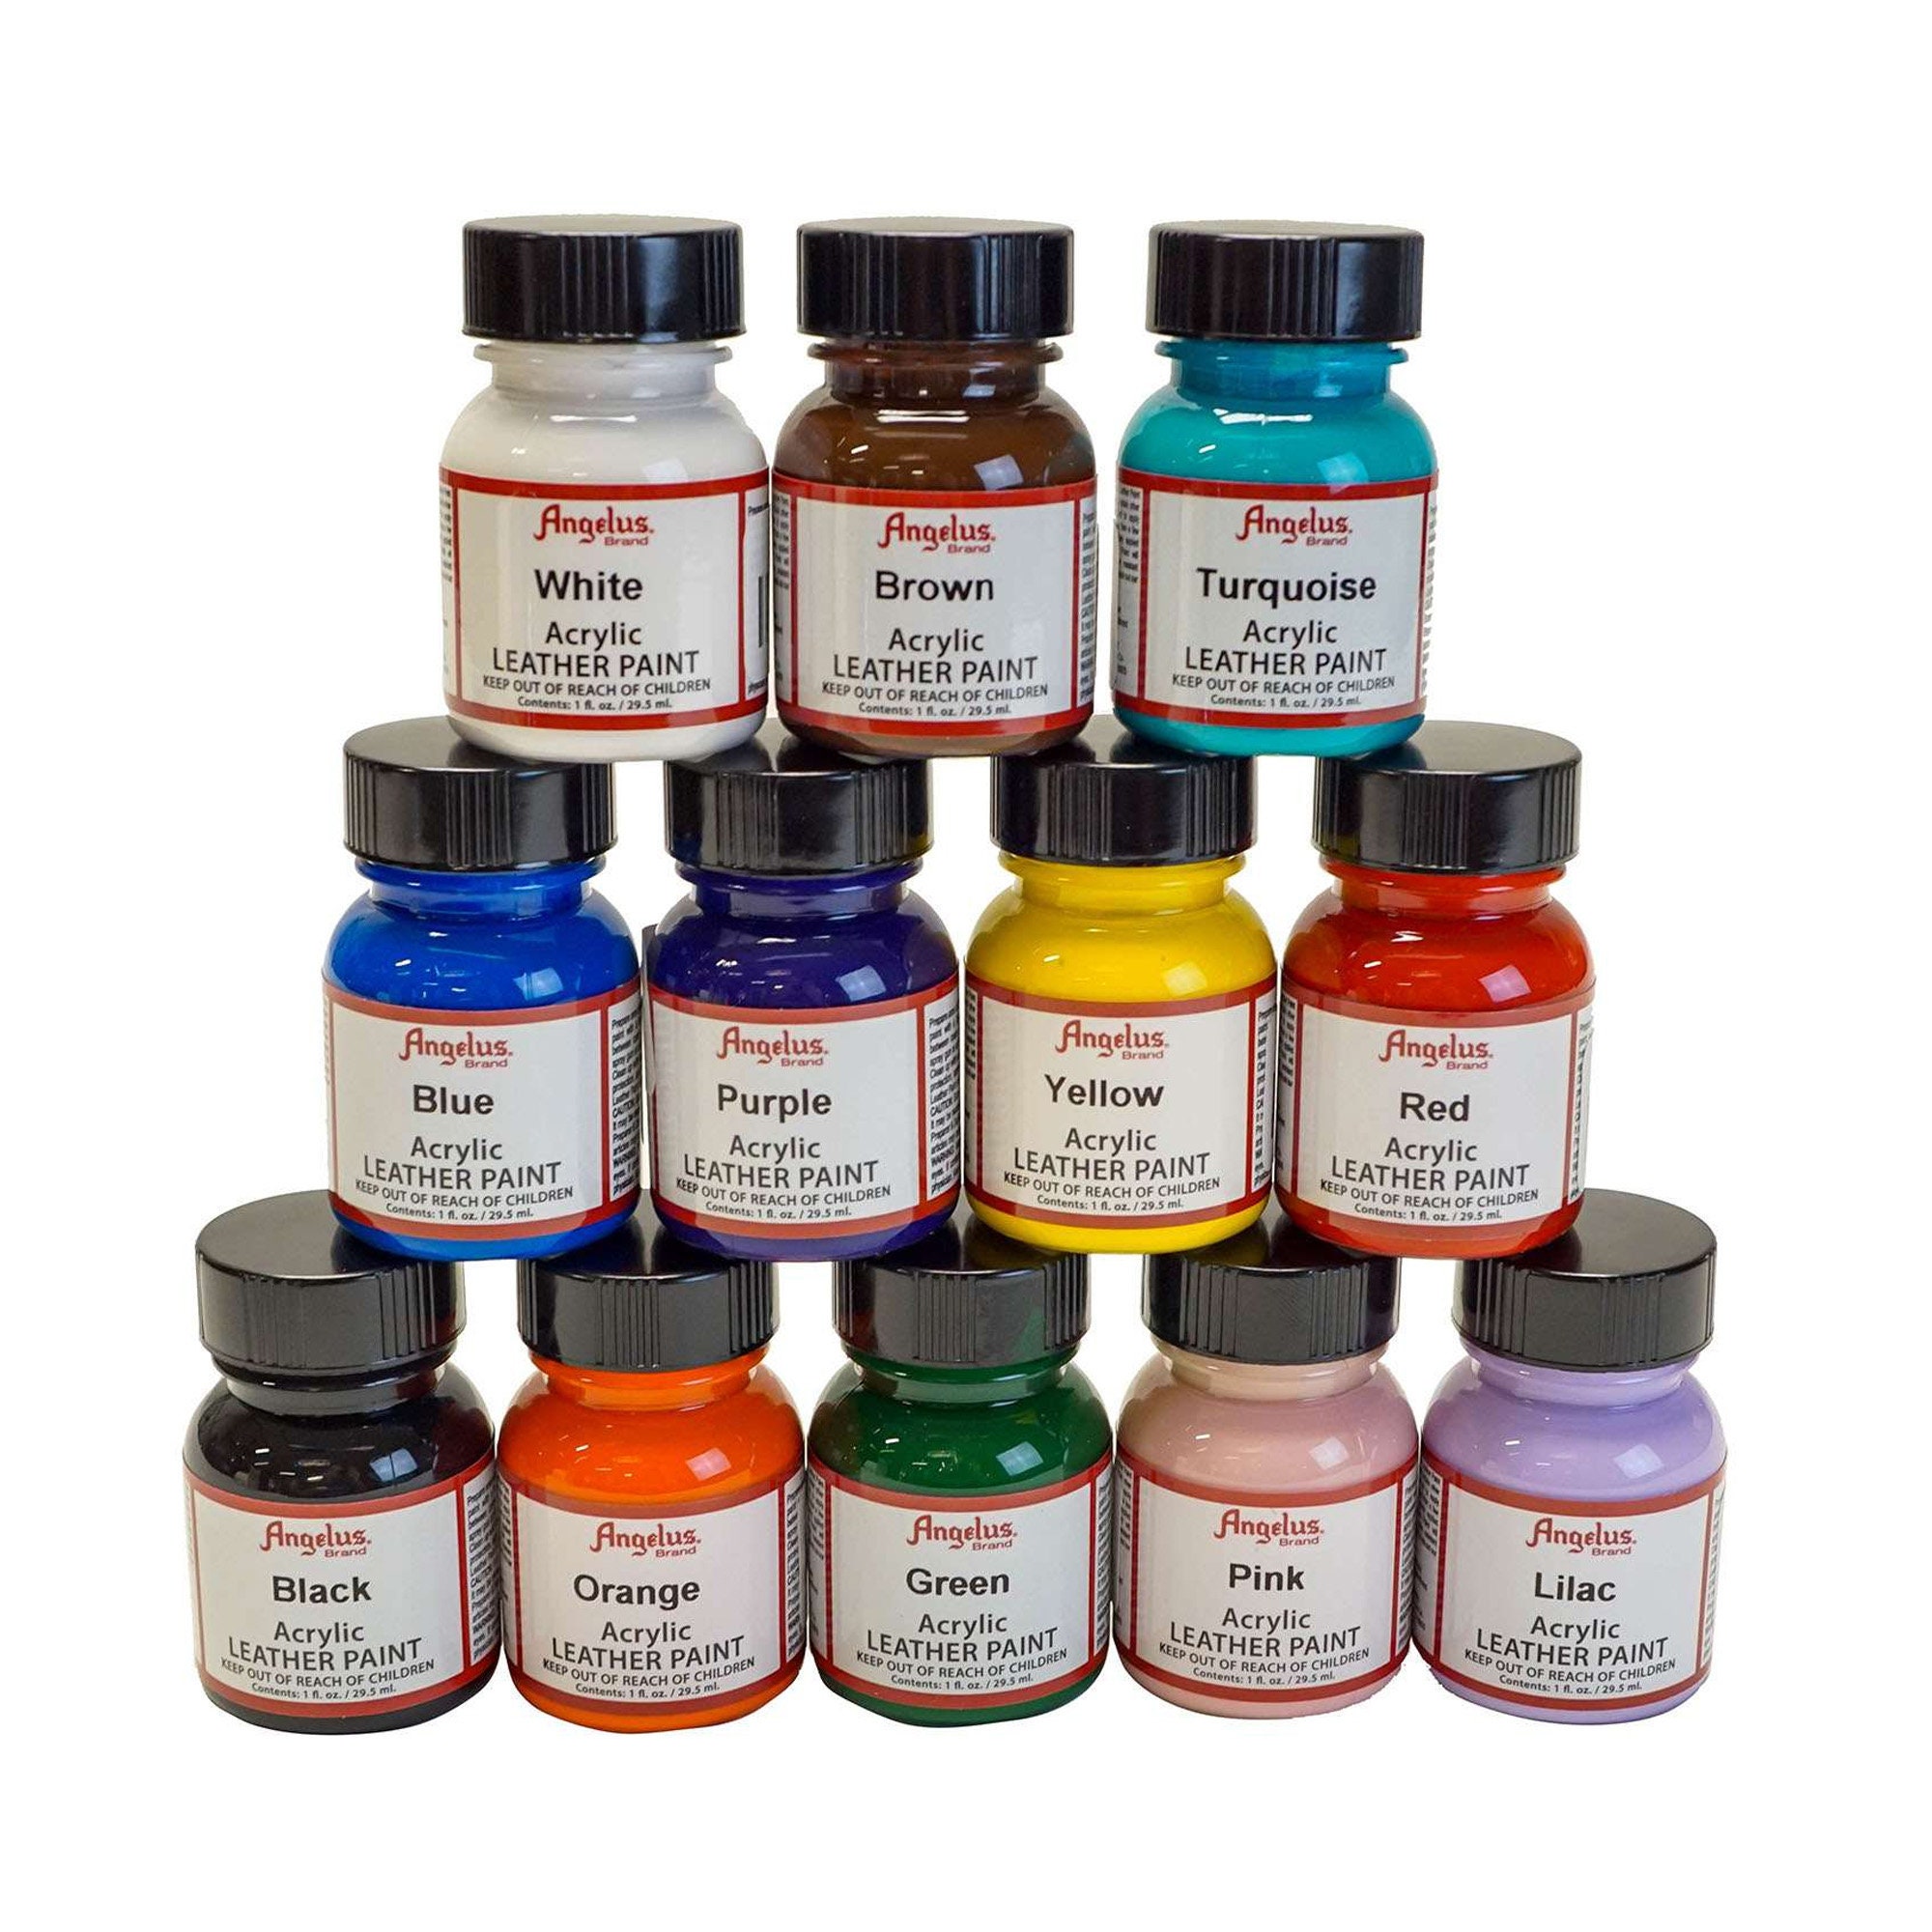 2 x Angelus Acrylic Leather Paint Water Resistant 1 Oz - Available 26  Colors